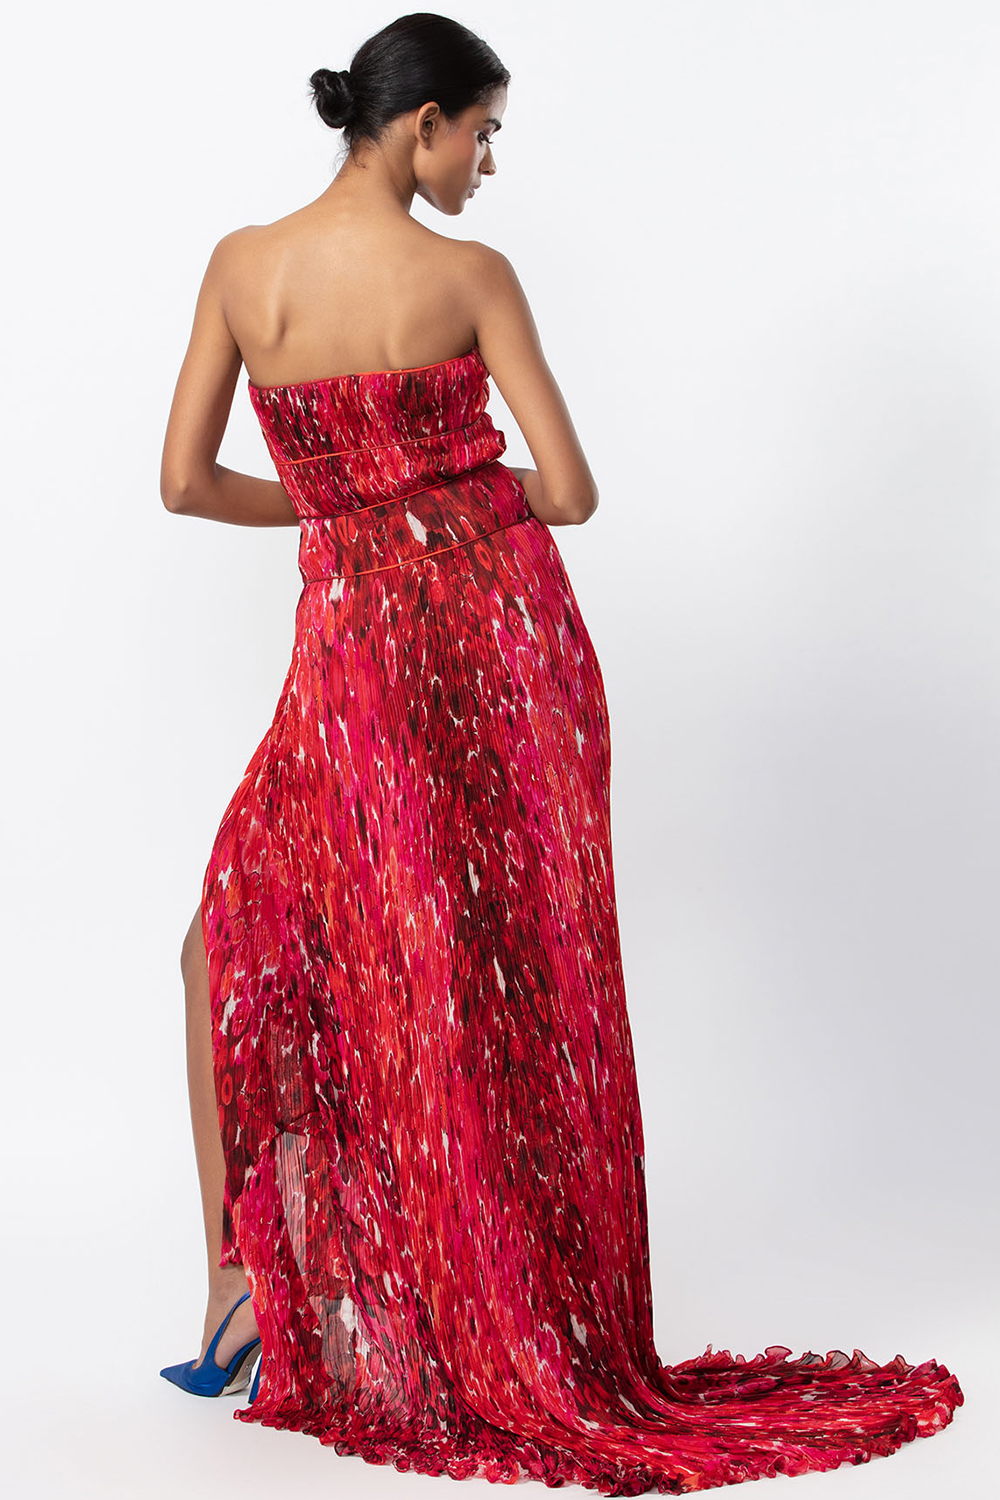 Abstract Floral Rpint Hand Micro Pleated Gown With Customisable Side Slit, Keyhole Detailing And Trail 